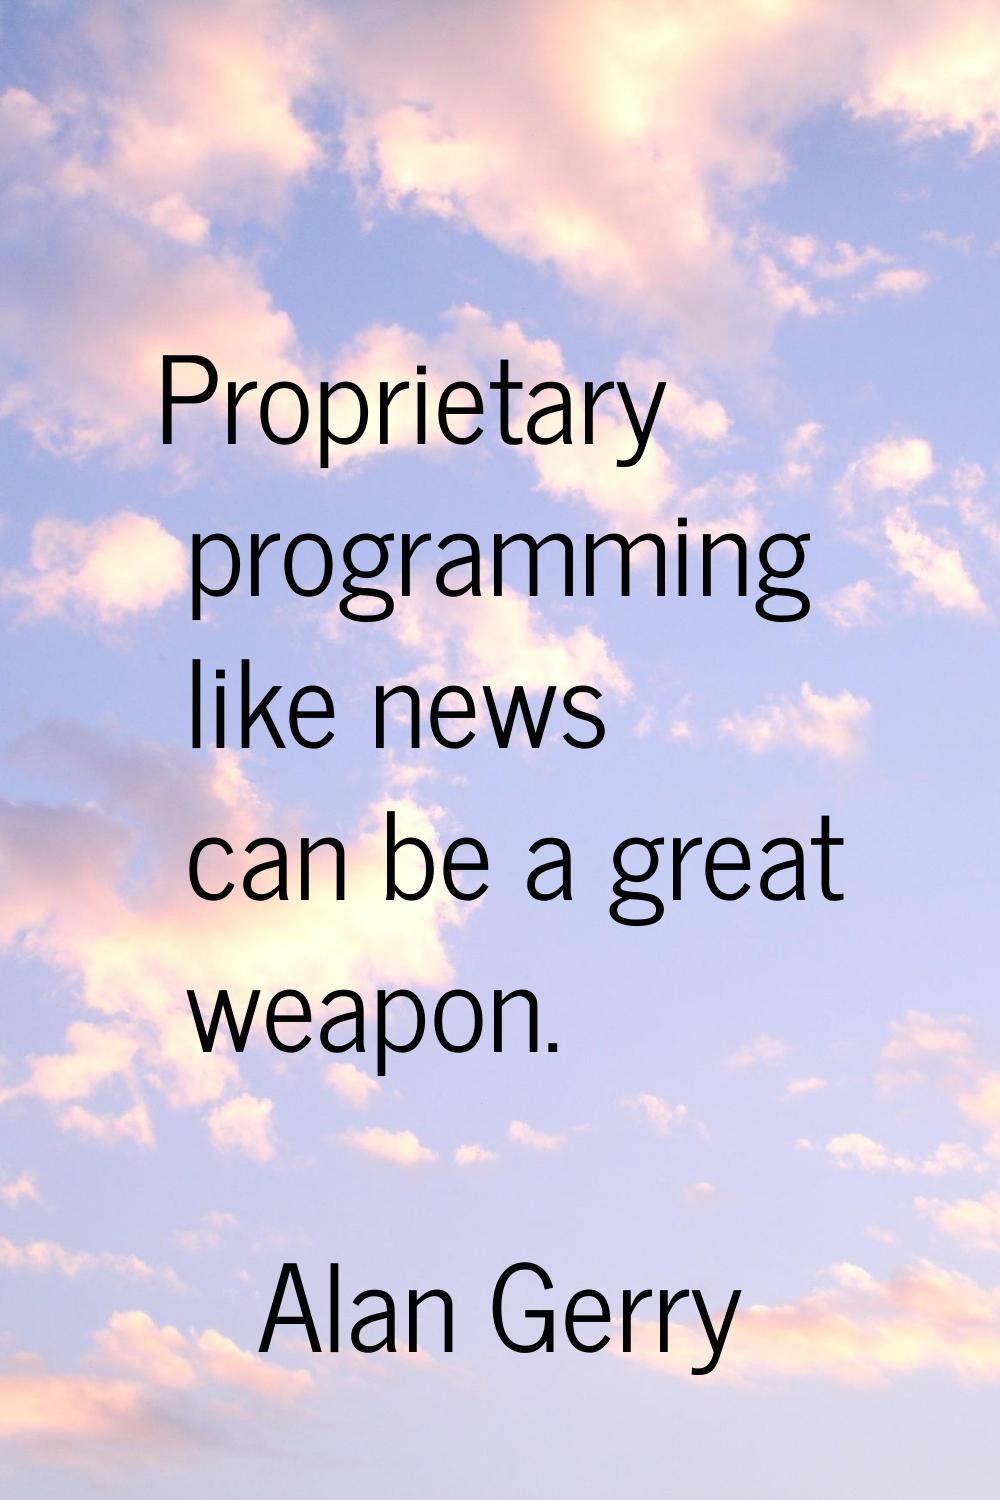 Proprietary programming like news can be a great weapon.